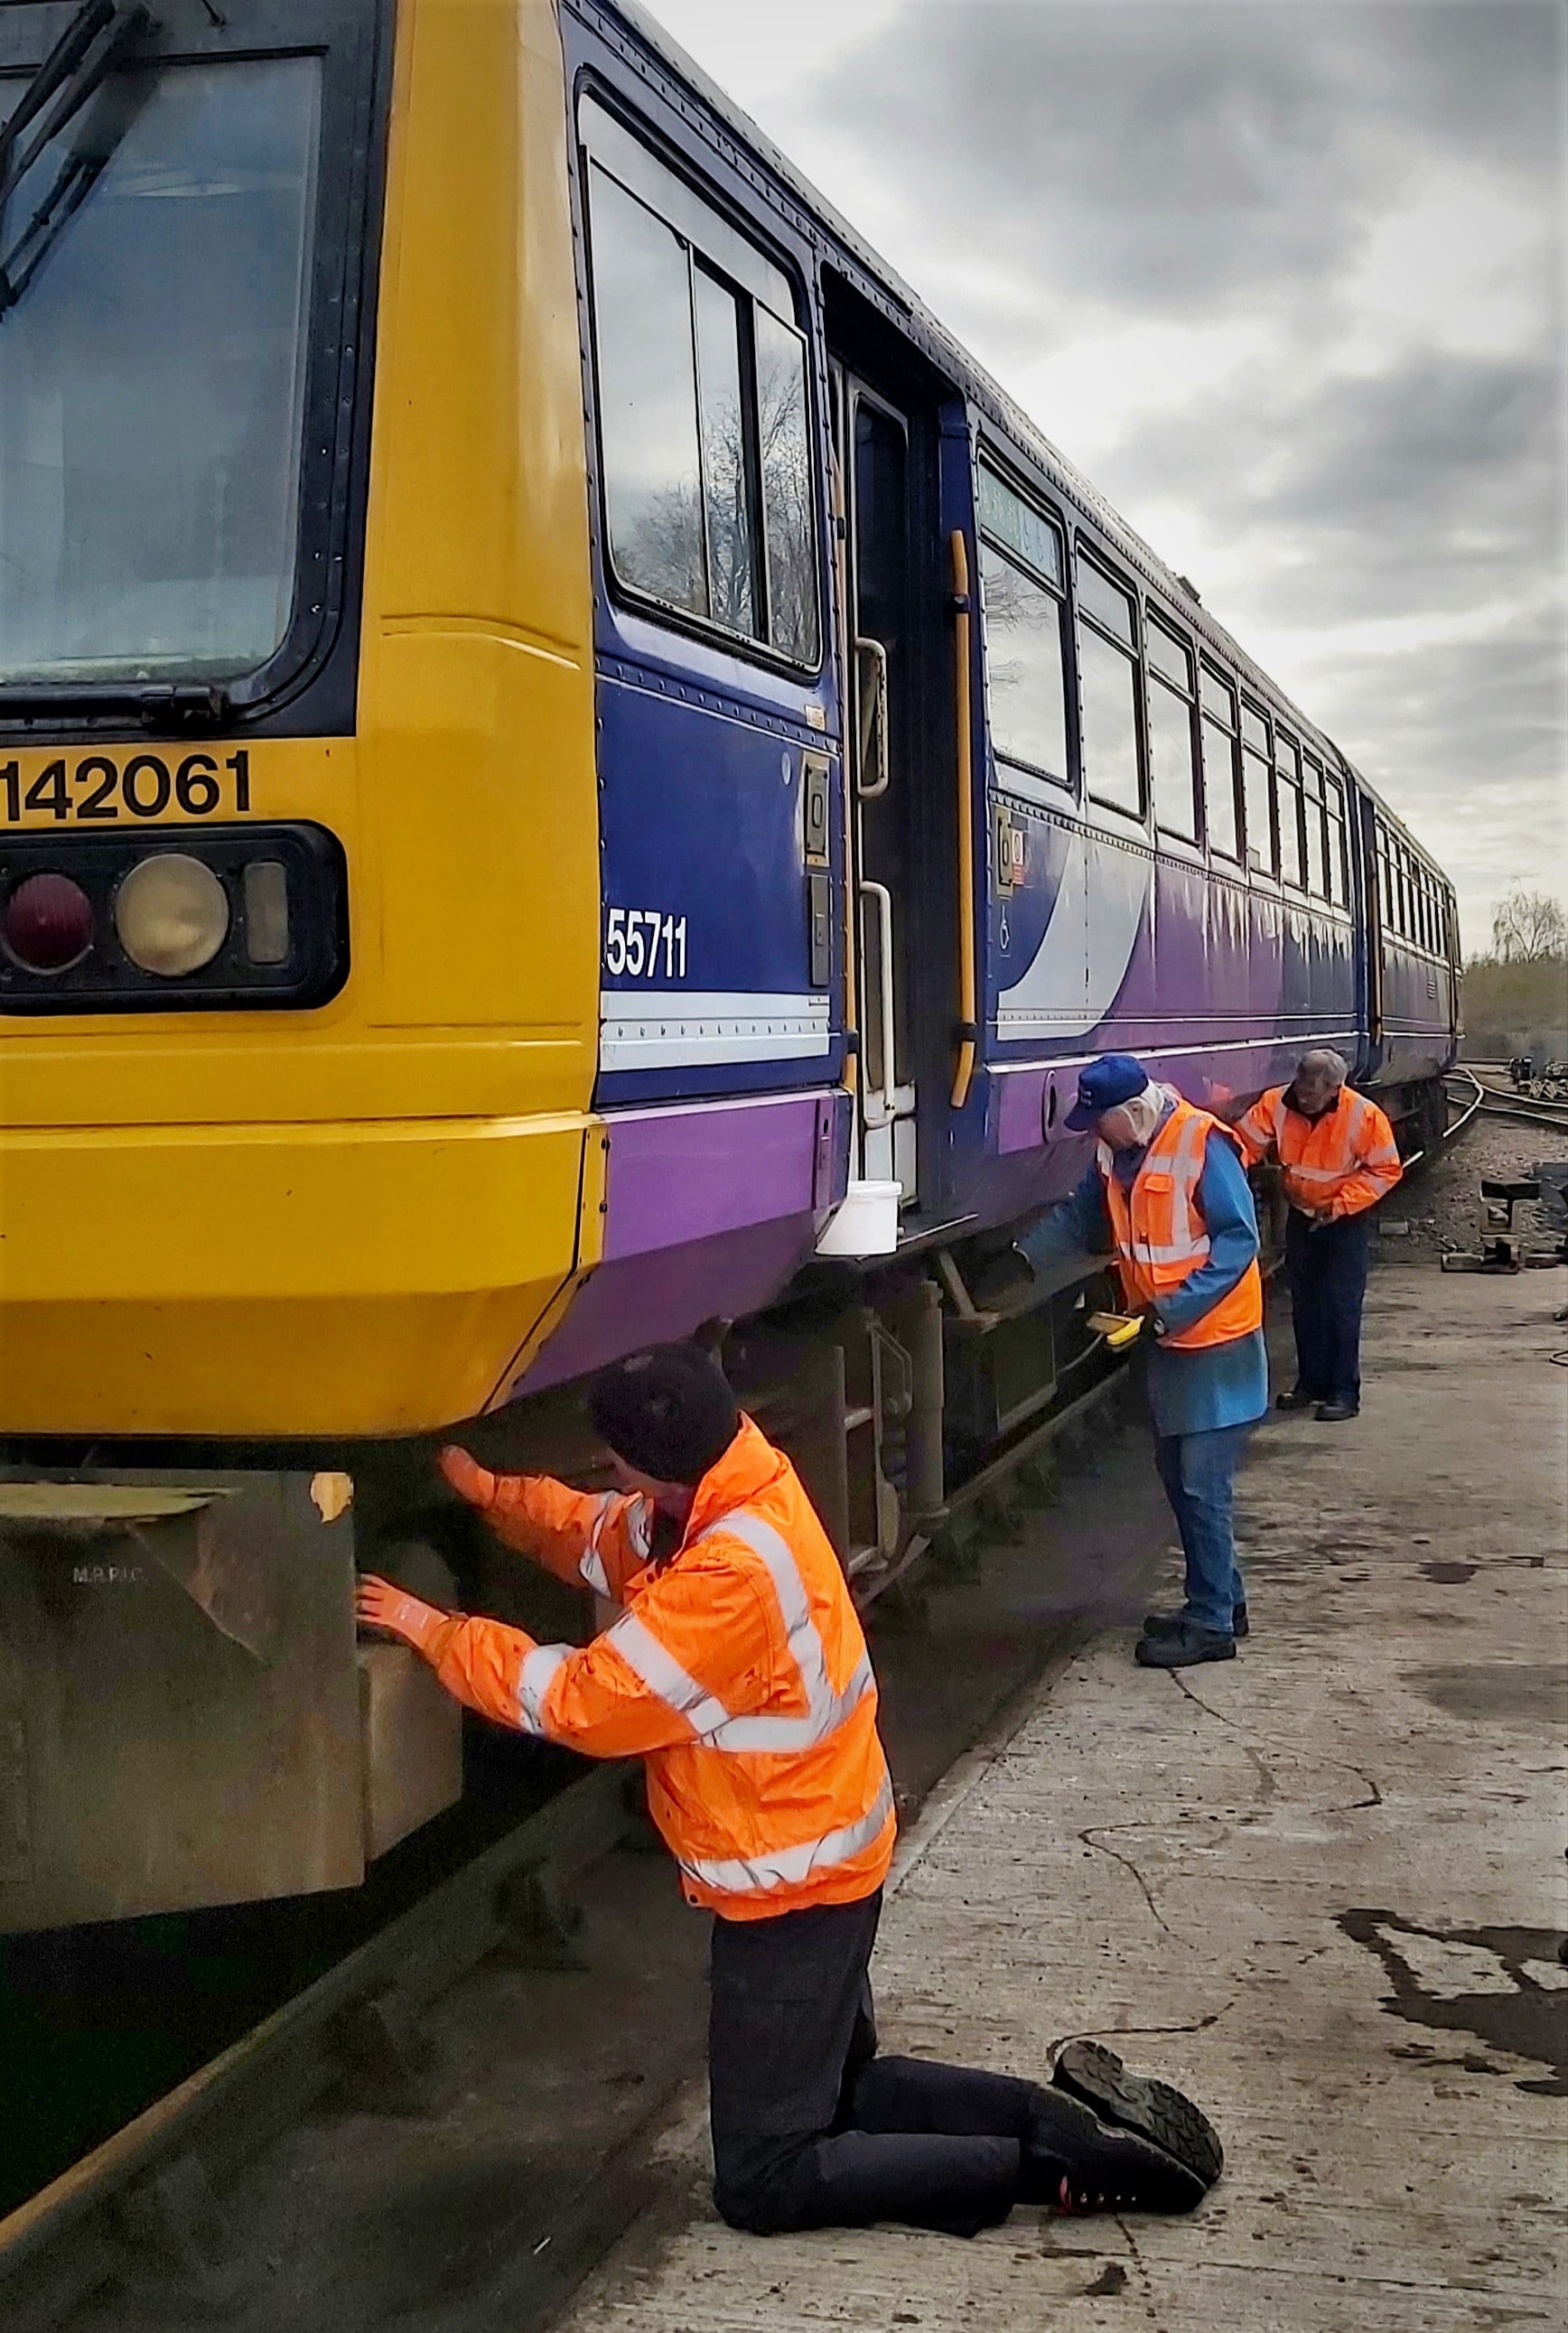 Pacer train being painted